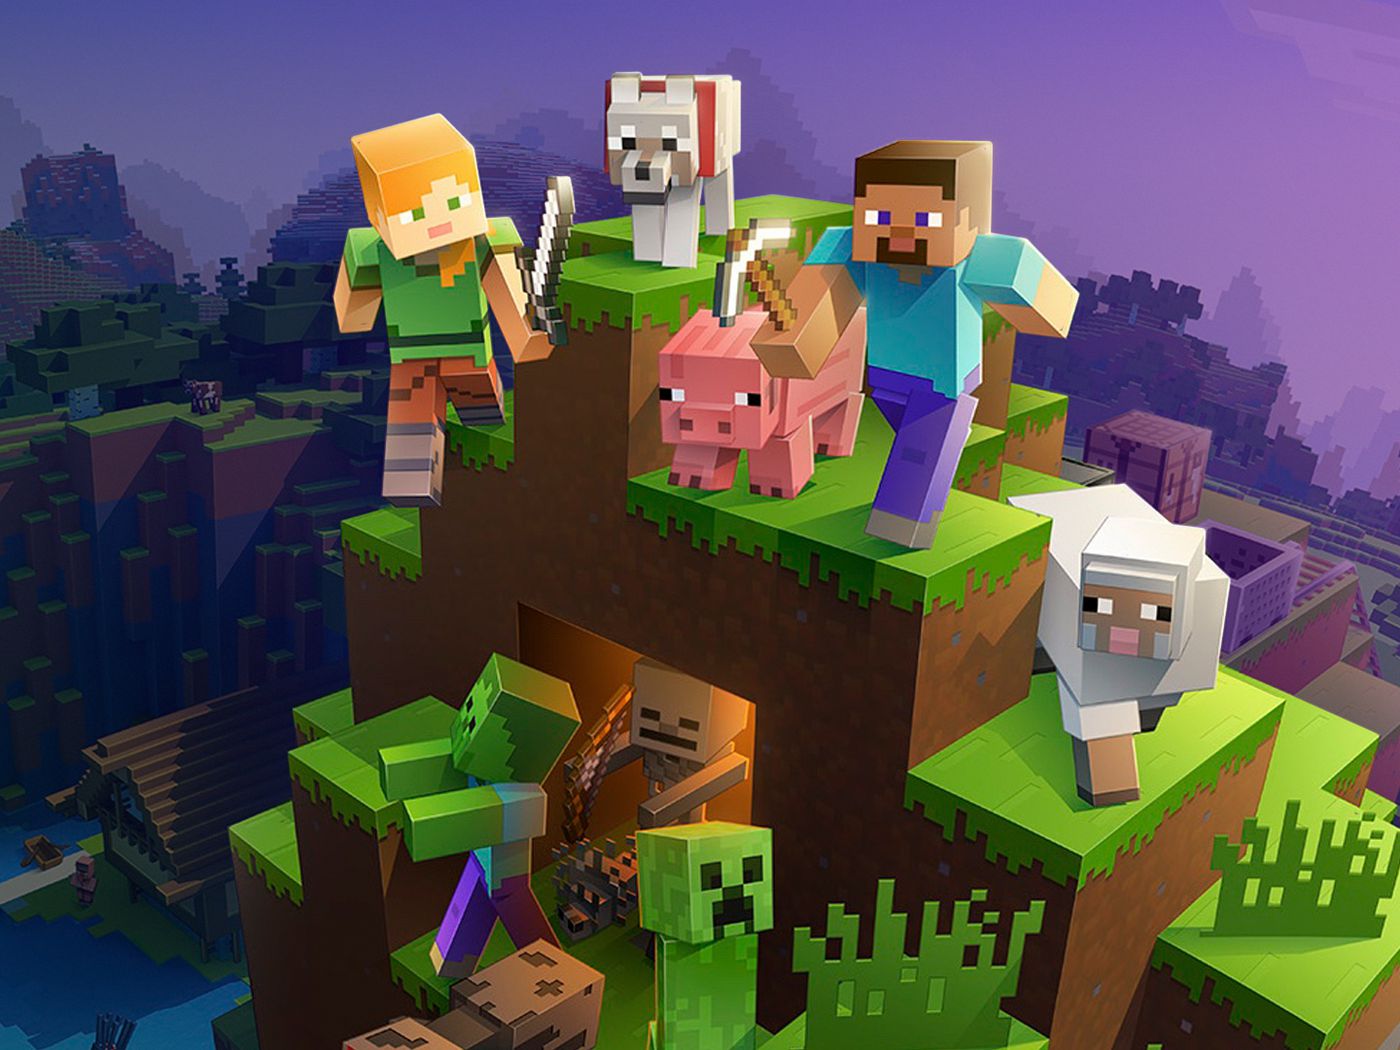 Minecraft - Most Downloaded PC Video Games in the World